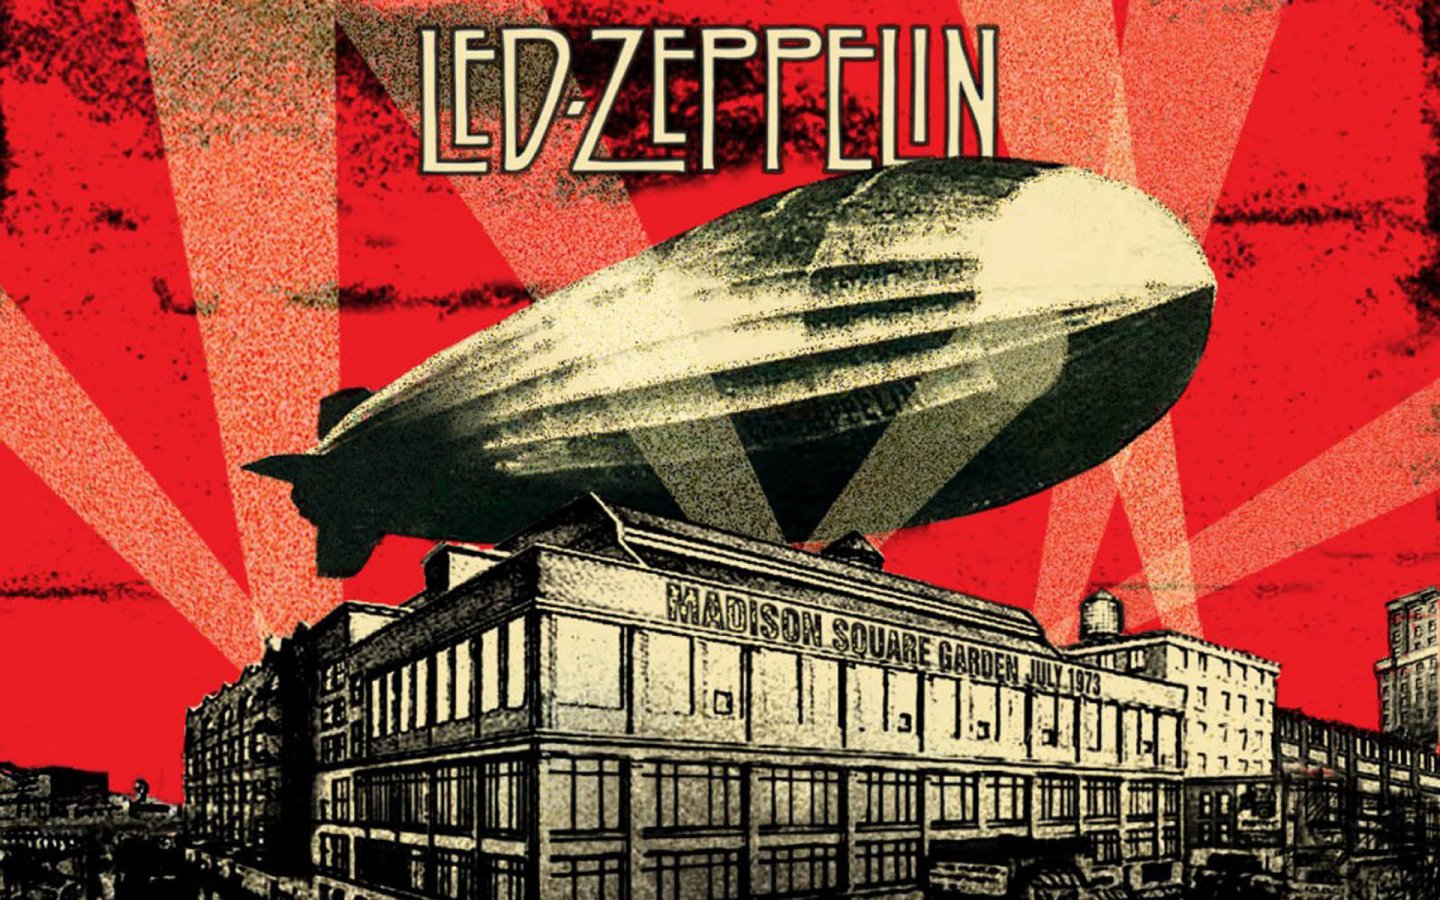 Led Zeppelin Backgrounds 69 pictures